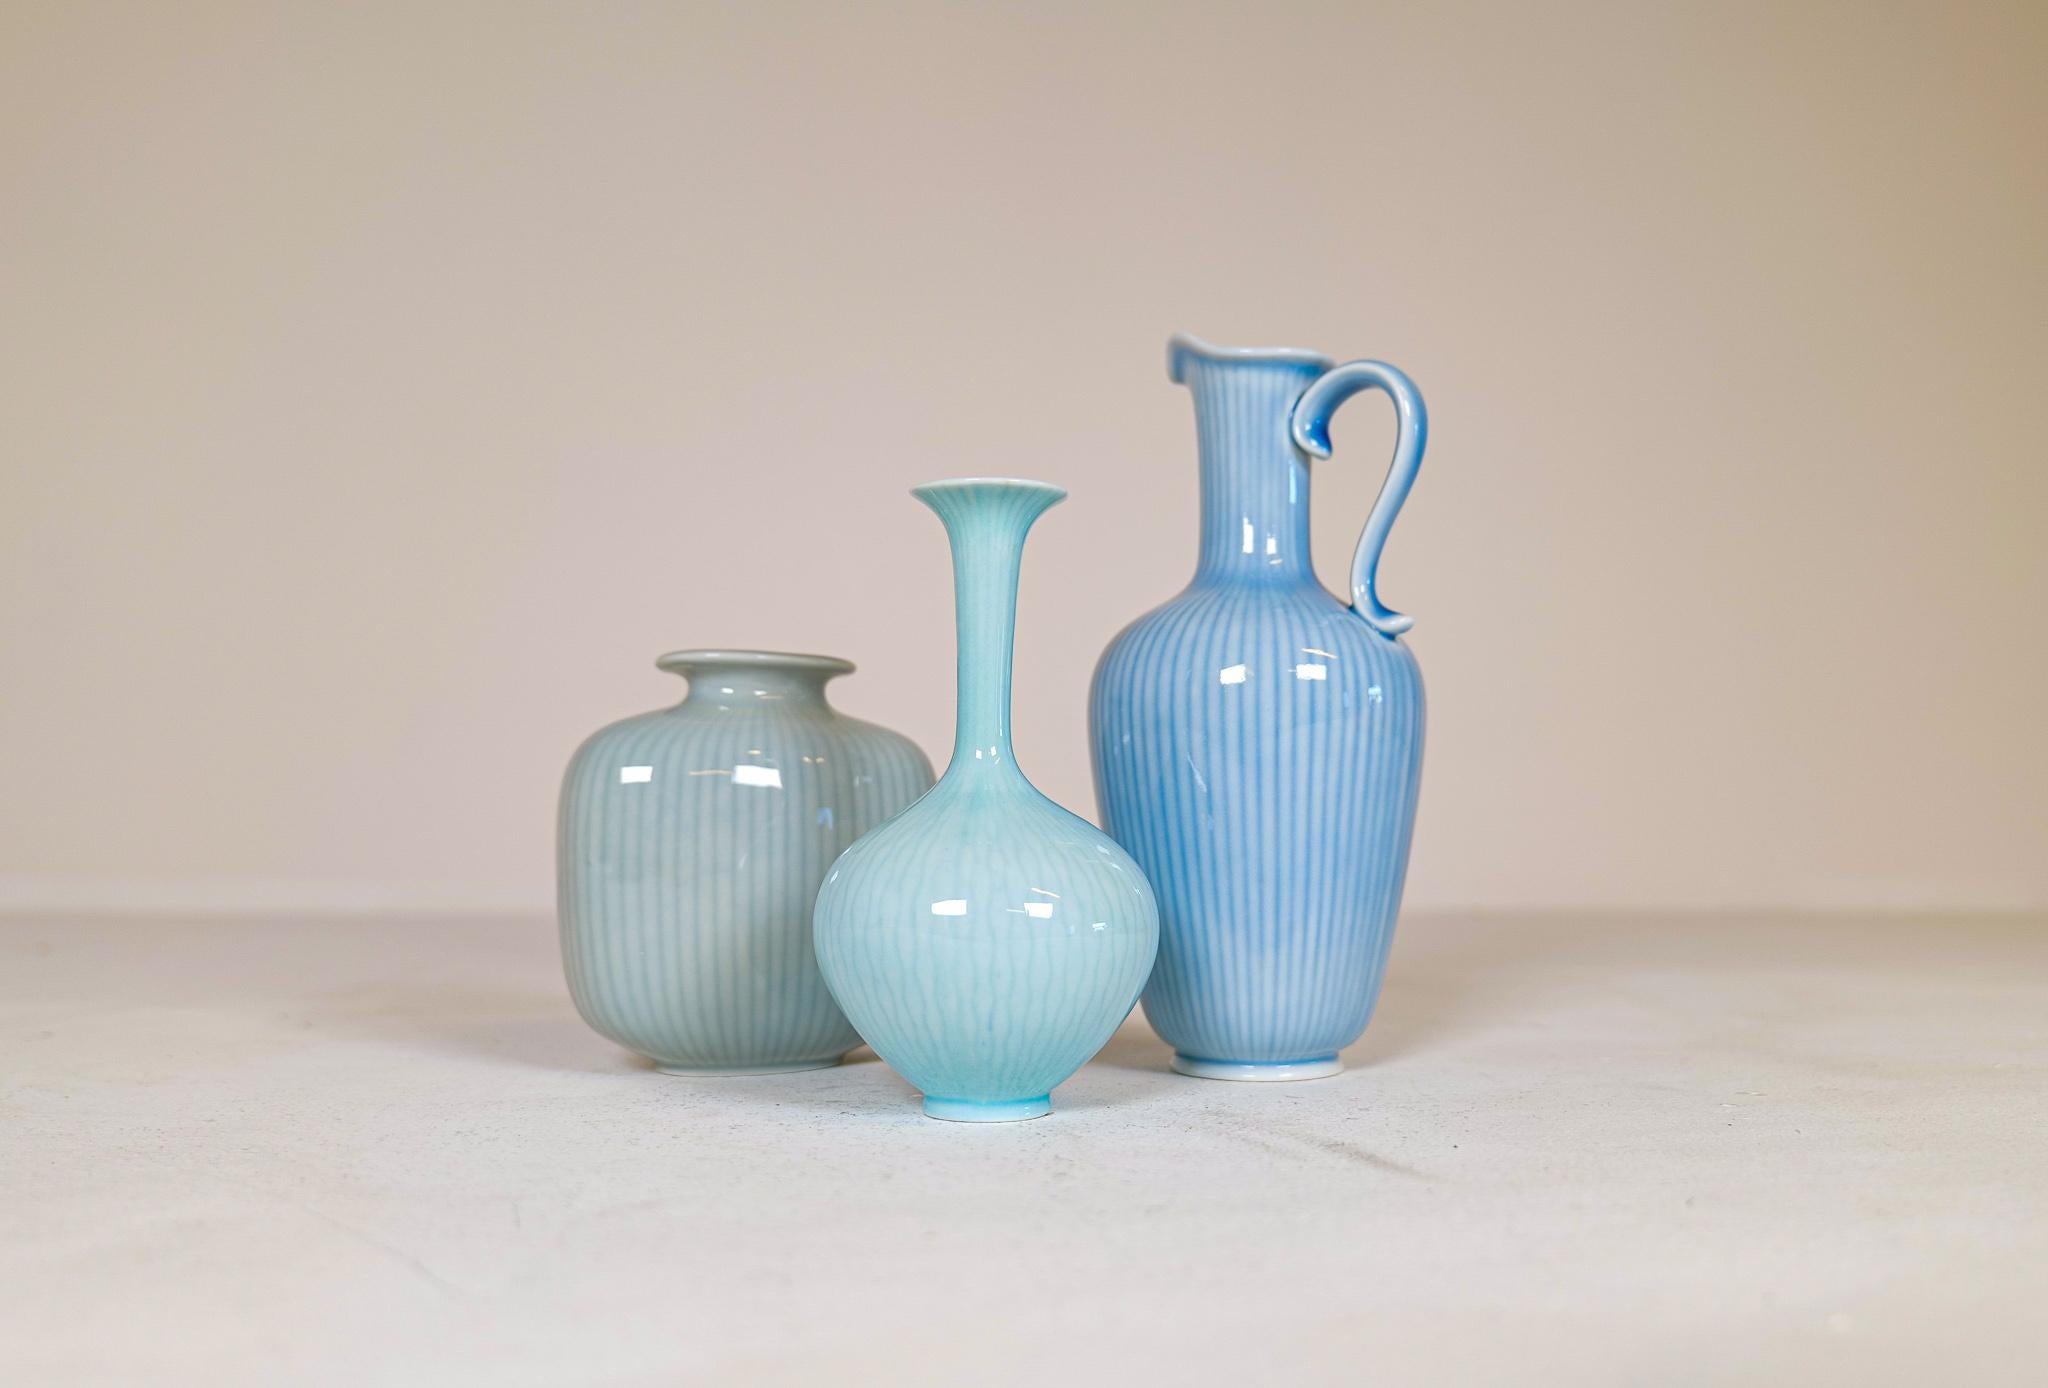 Three wonderful vases from Rörstrand and maker, designer Gunnar Nylund. Made in Sweden in the midcentury. Beautiful, glazed vases with wonderful curves. The craftsmanship on these vases is stunning. The way that the shape and lines of the vases